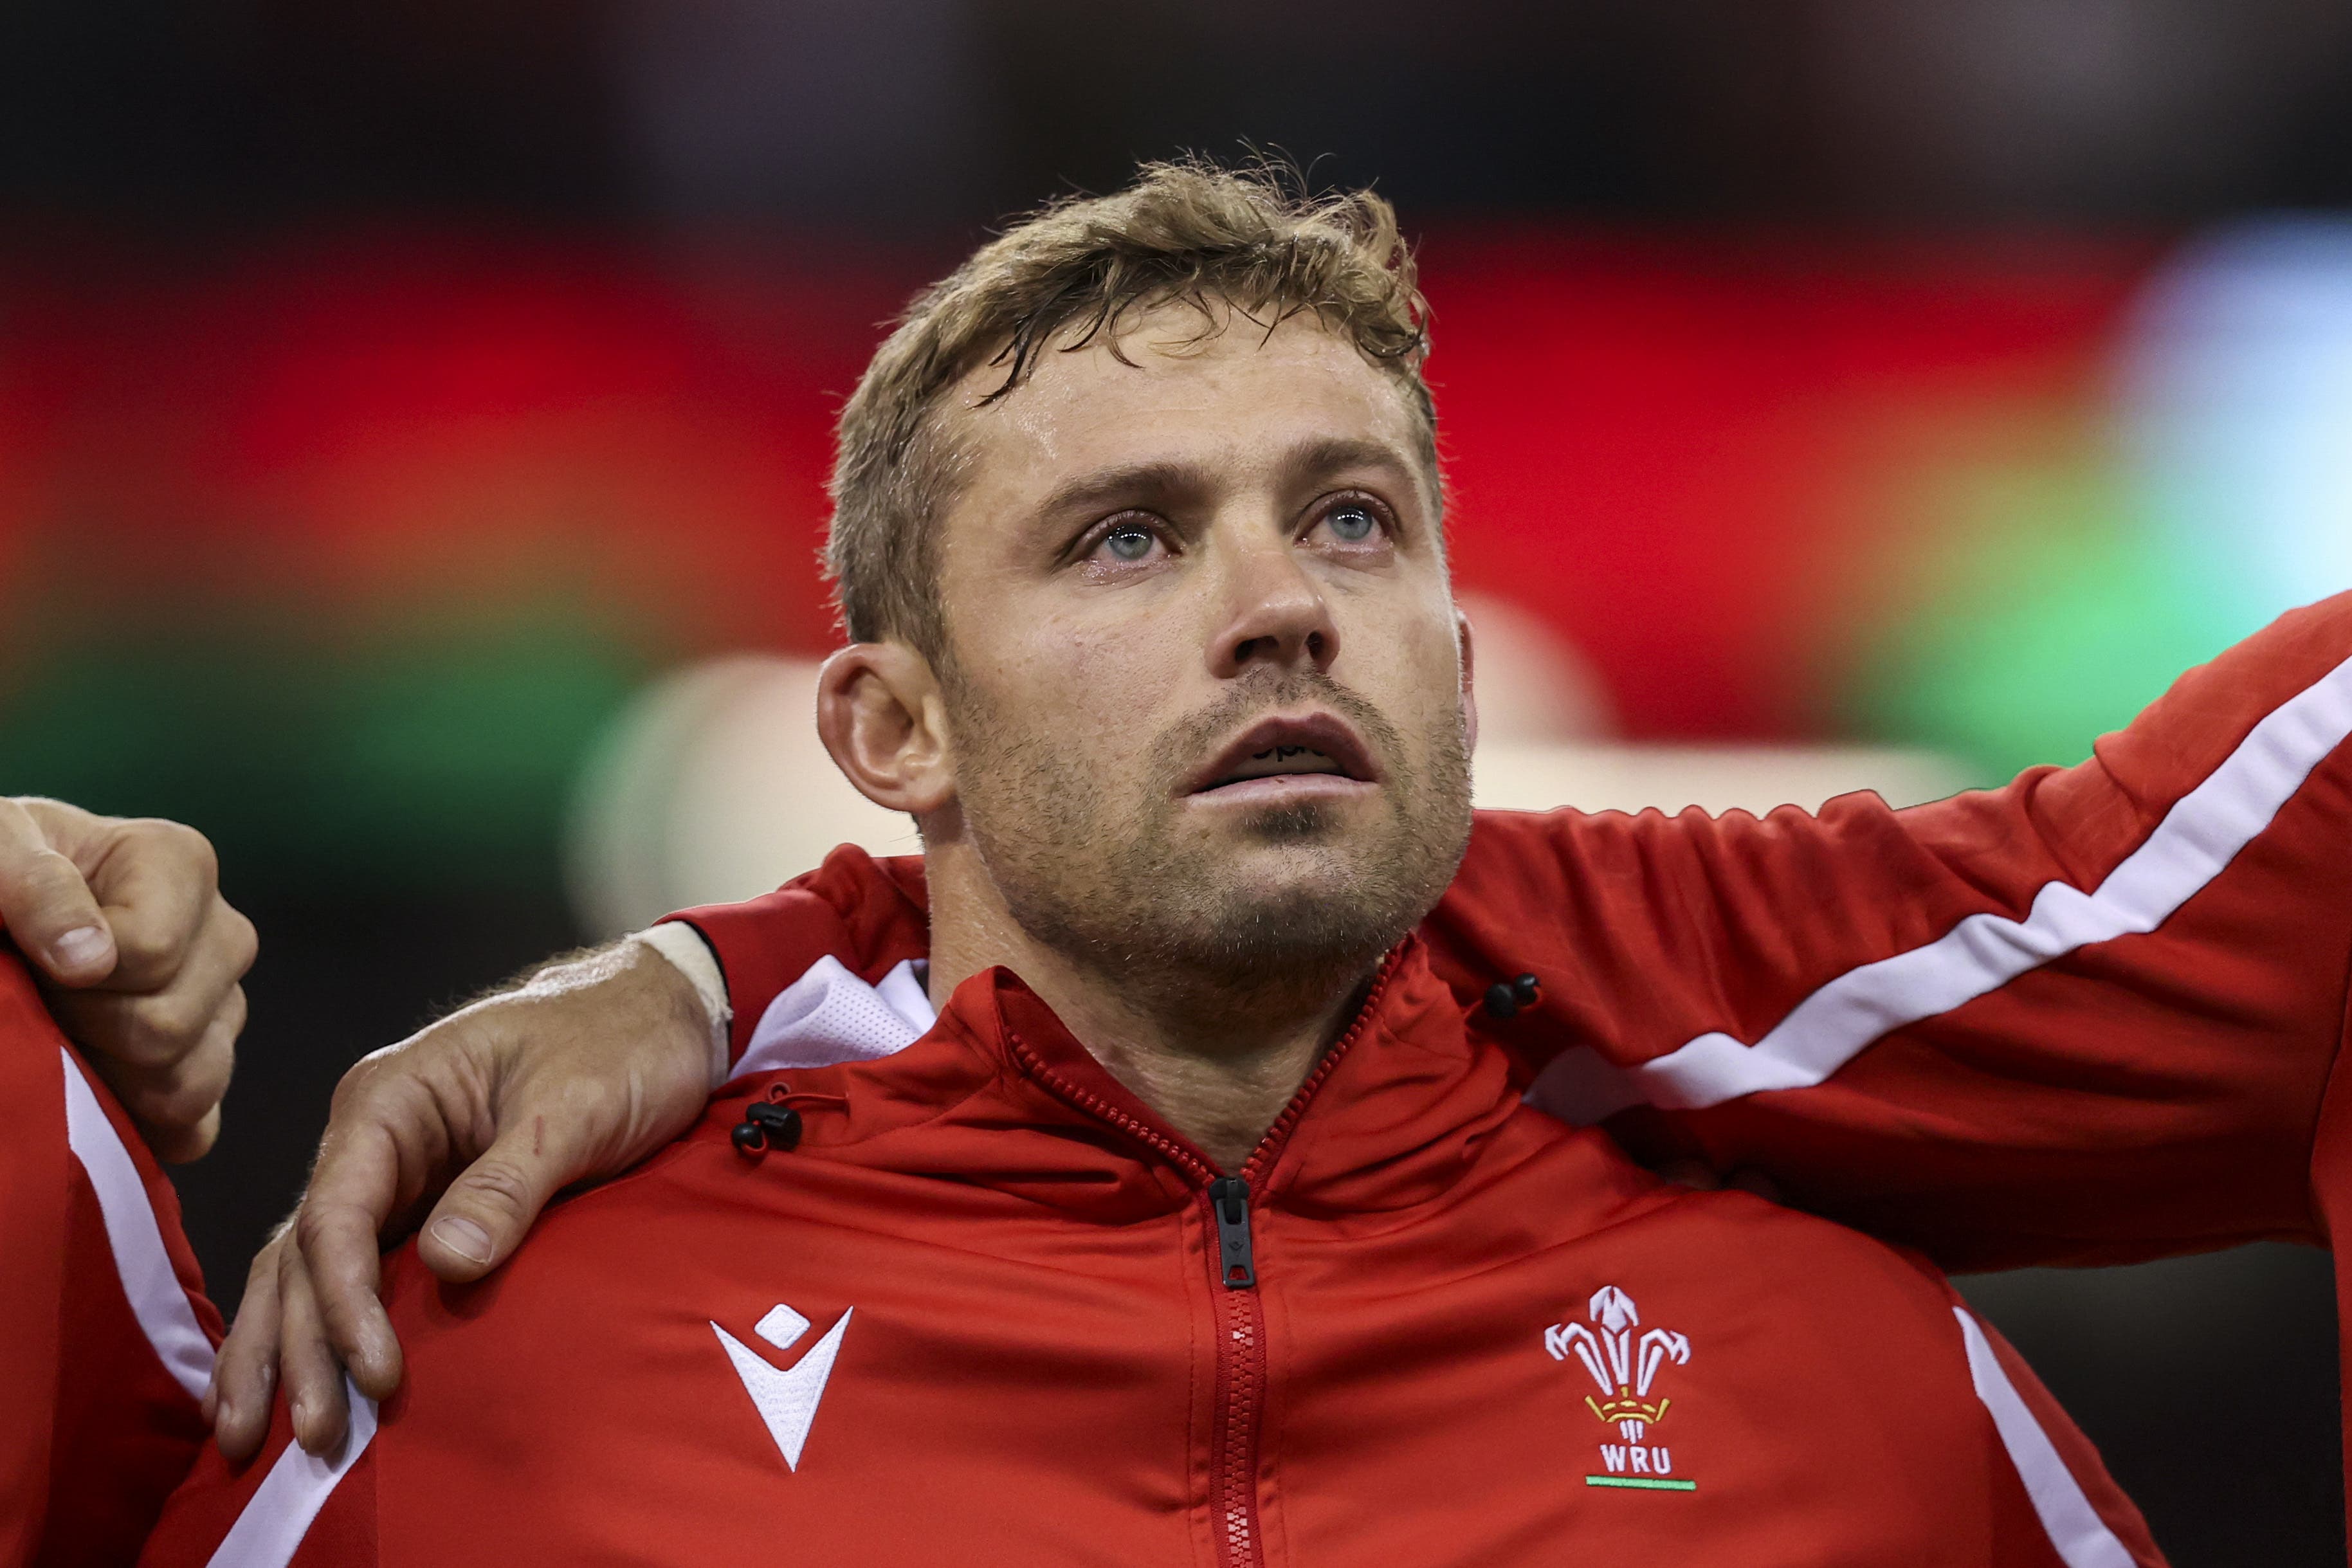 Leigh Halfpenny has 'an exciting challenge' awaiting him after